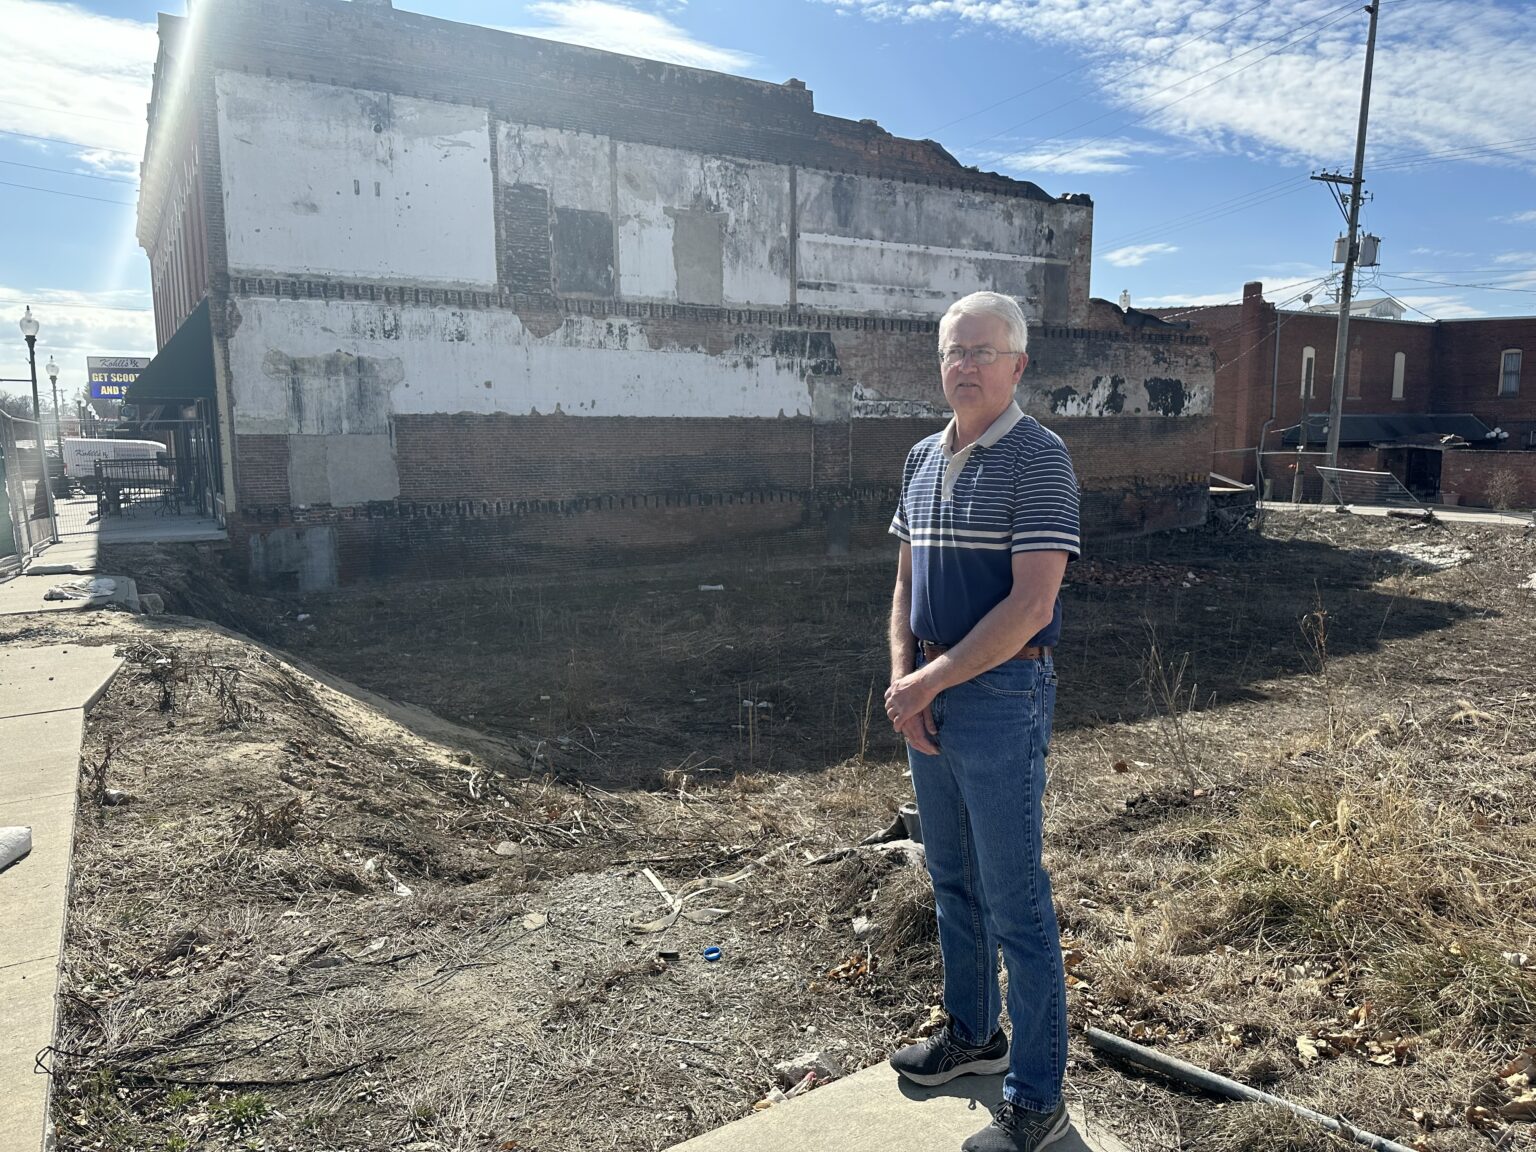 Tom Mulholland stands near the site where a 2021 fire destroyed Mulholland Grocery, long a staple of Main Street in Malvern, Iowa.